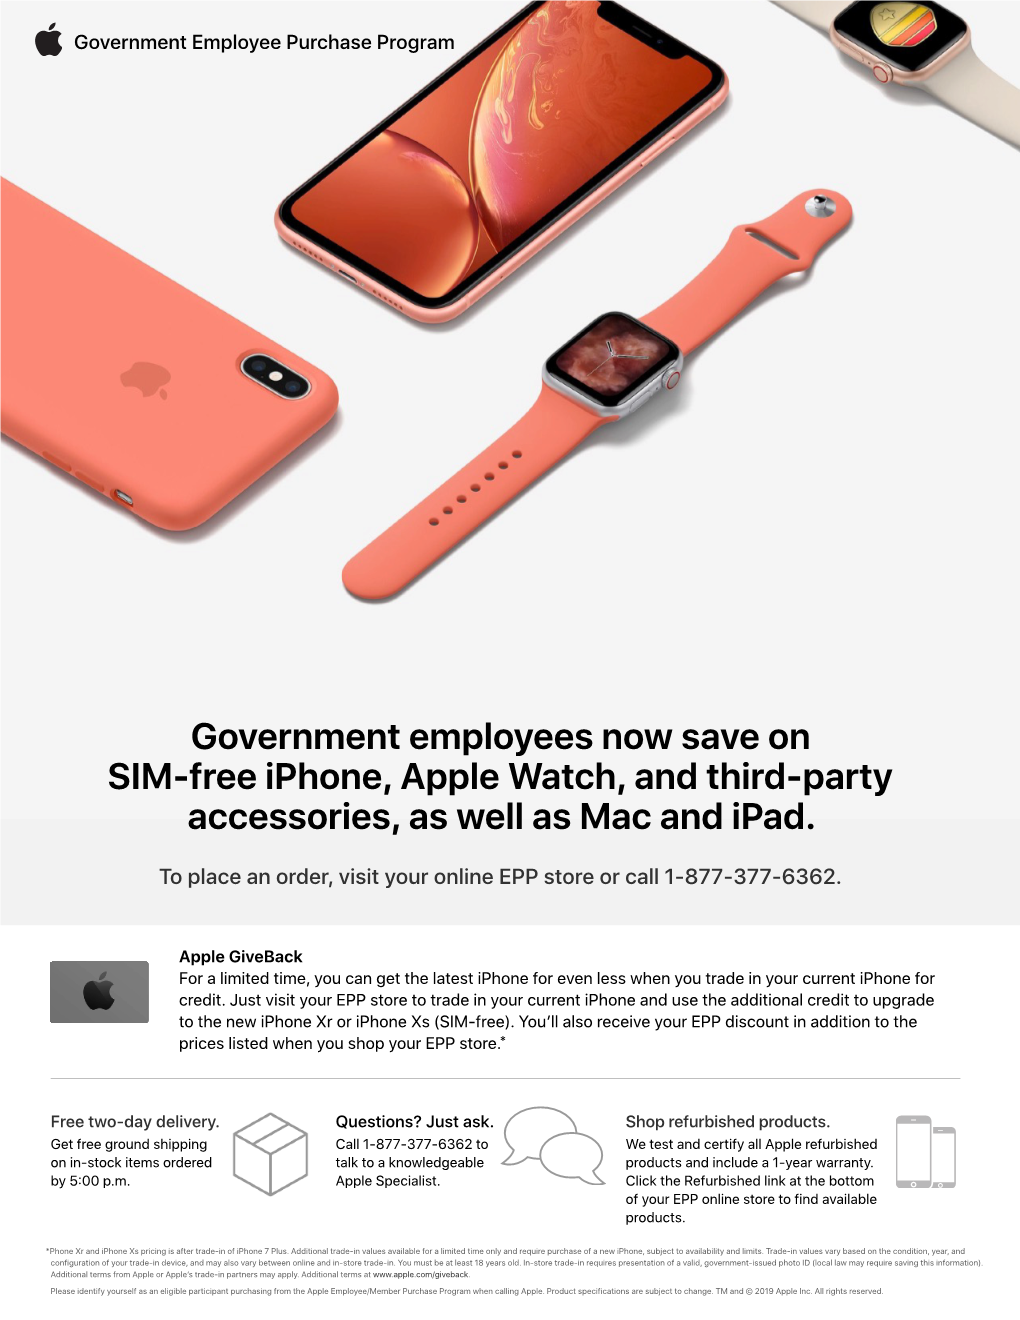 Government Employees Now Save on SIM-Free Iphone, Apple Watch, and Third-Party Accessories, As Well As Mac and Ipad